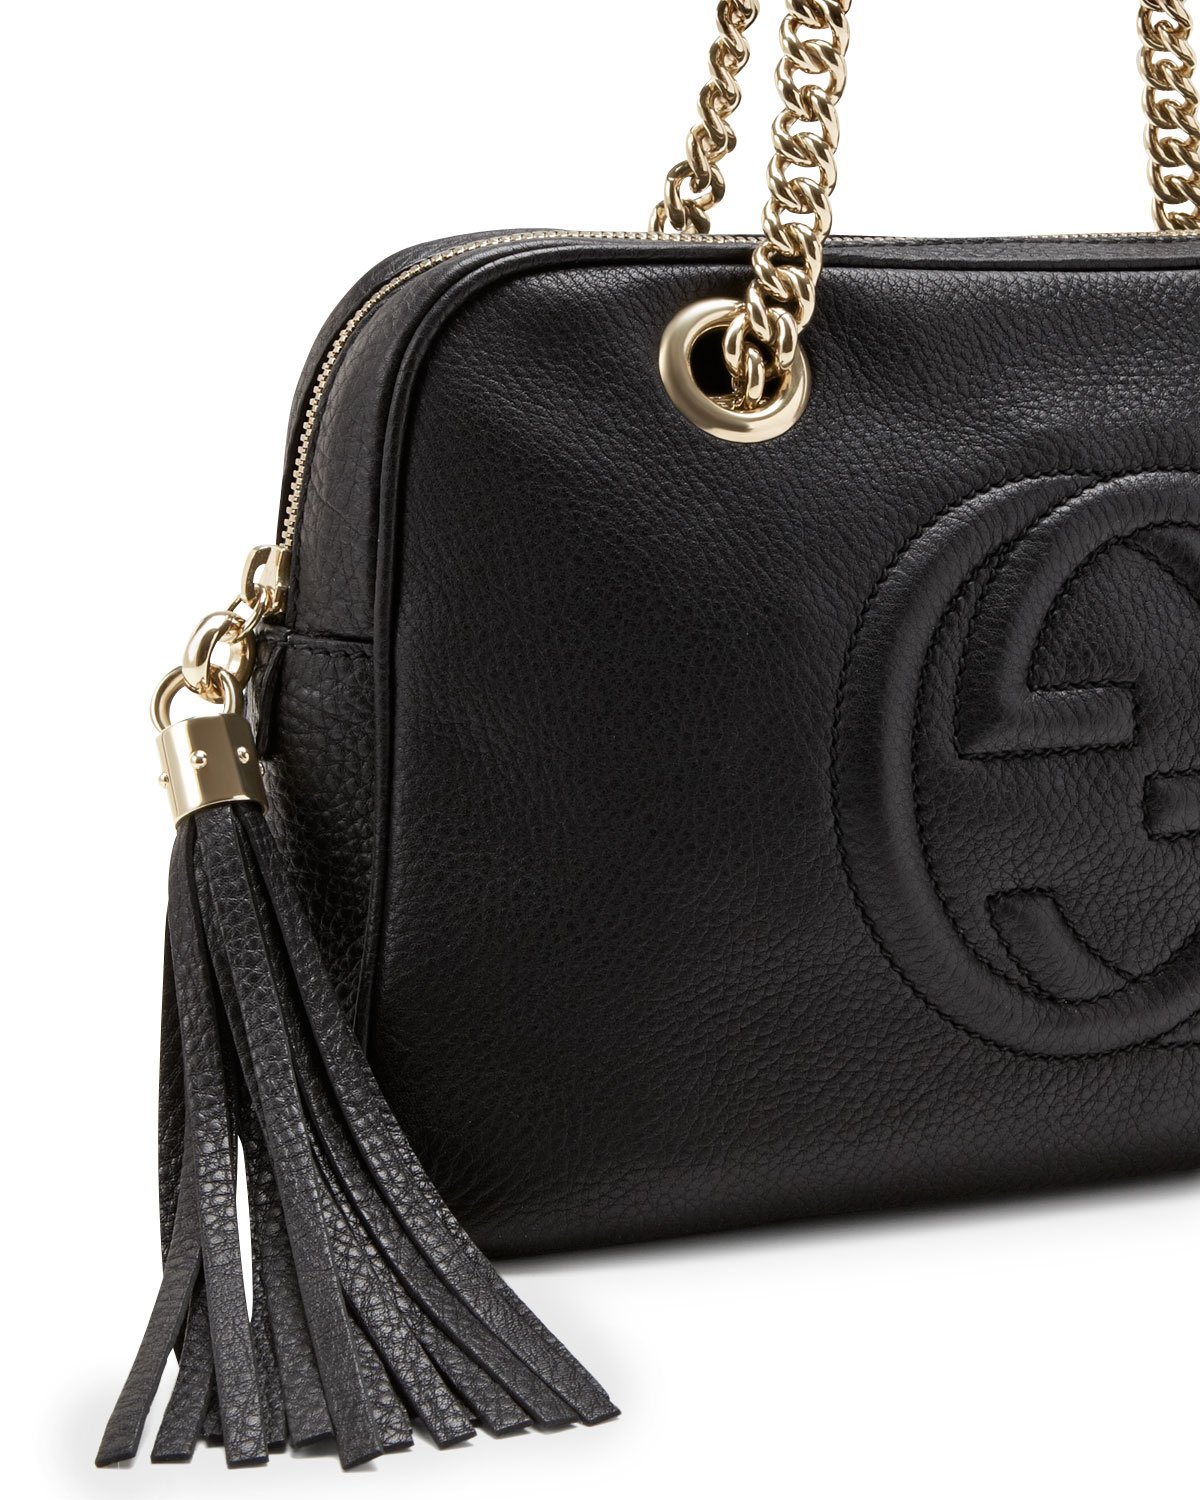 Lyst - Gucci Soho Leather Doublechainstrap Shoulder Bag in Black